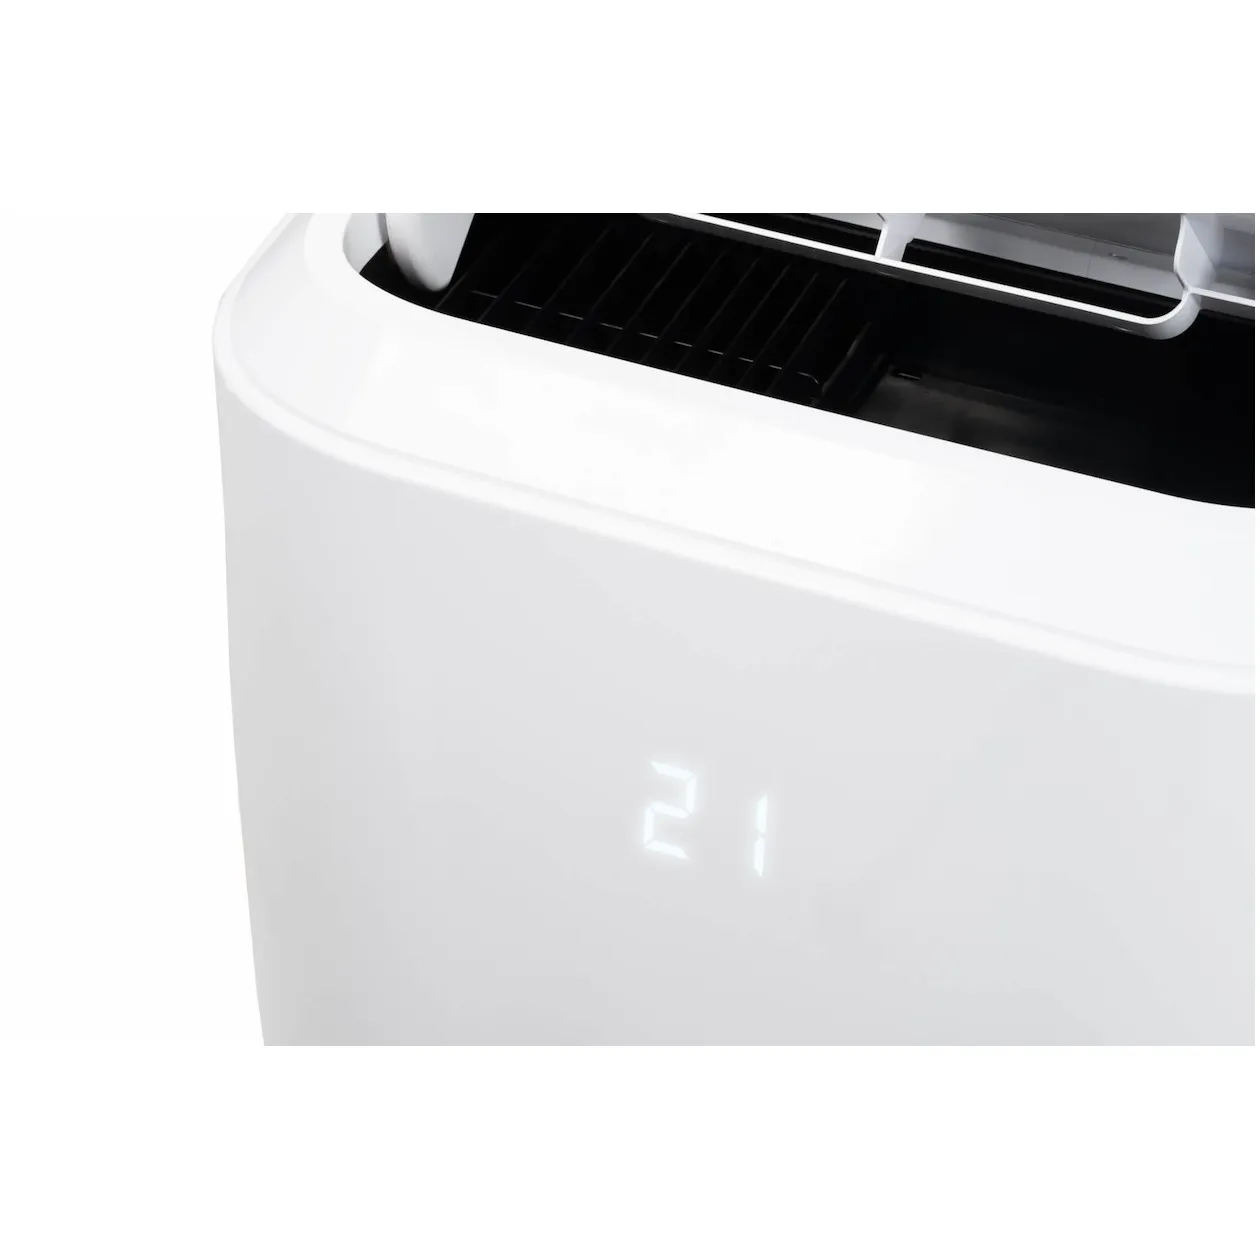 Eurom Cool-Eco 90 A++ Wifi